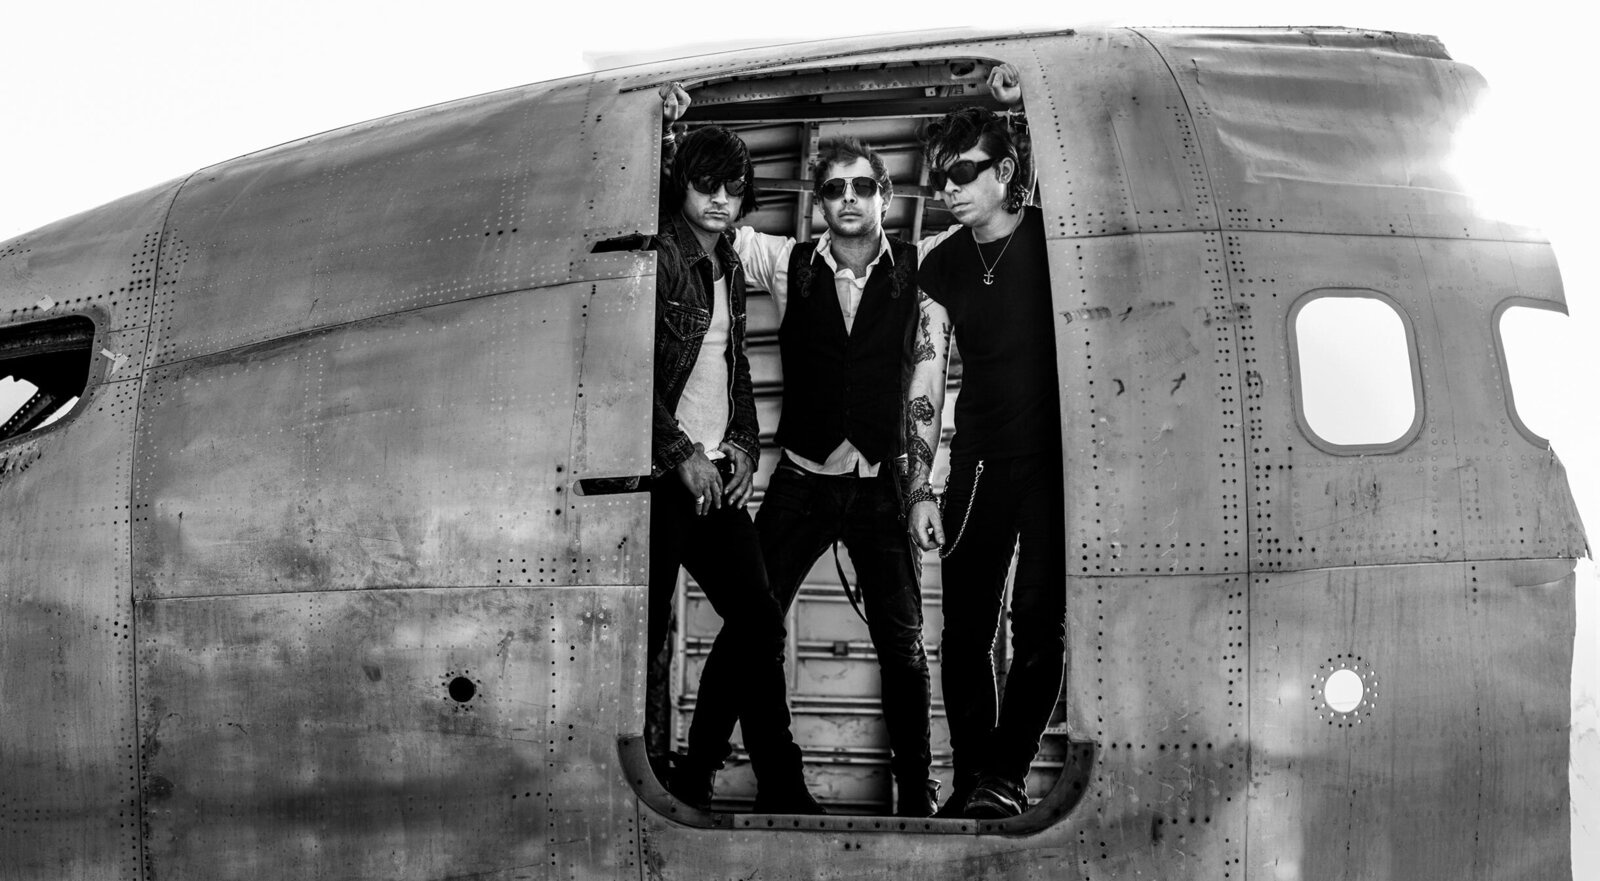 Band Photo Dead Day Revolution three members in doorway of old metal airplane black and white